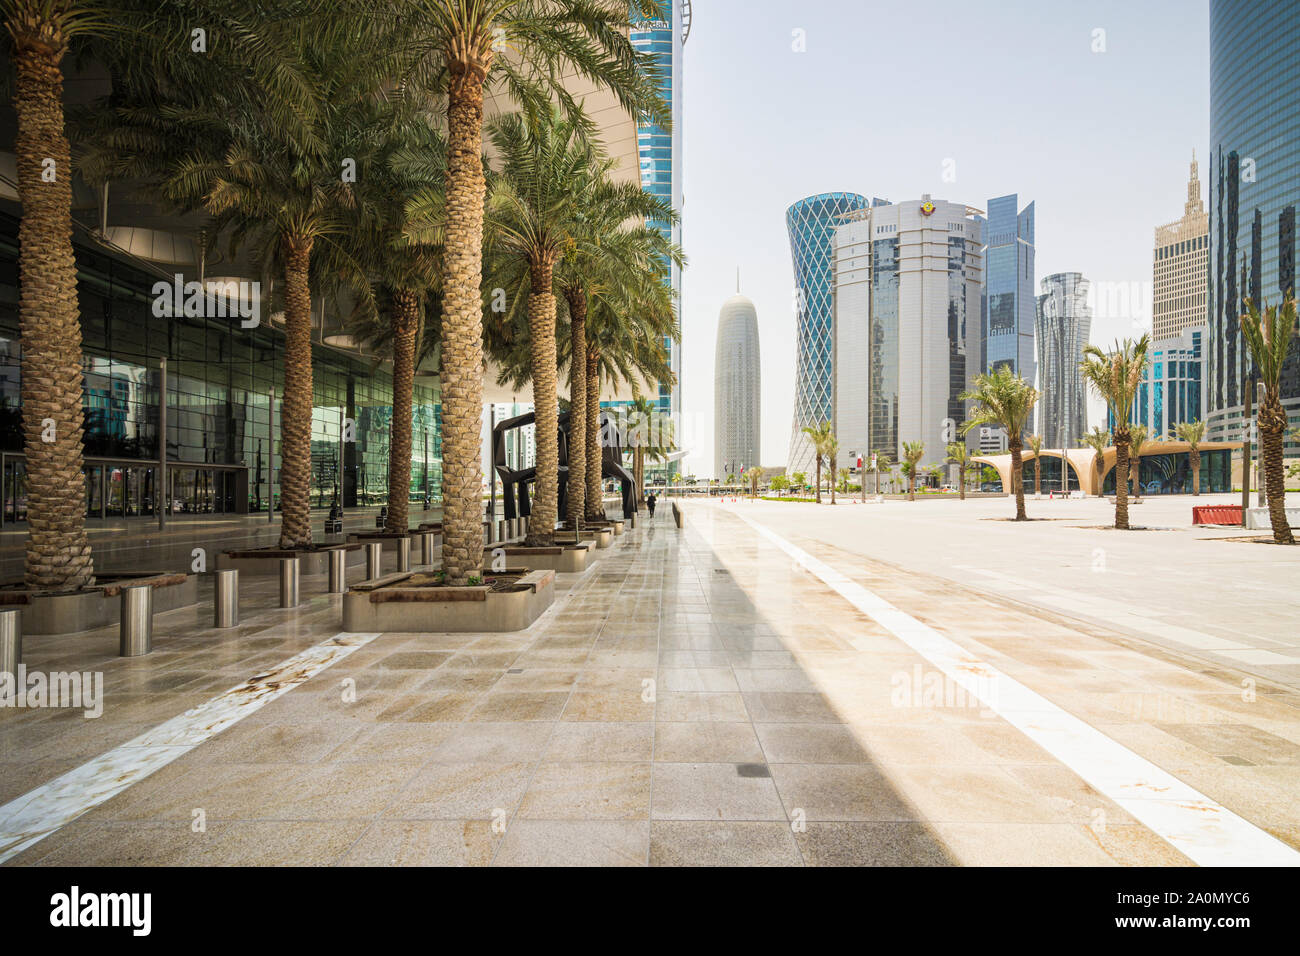 Views of the forecourt of the Doha Exhibition and Convention Center looking towards the skyscrapers of the West Bay area, Doha, Qatar Stock Photo